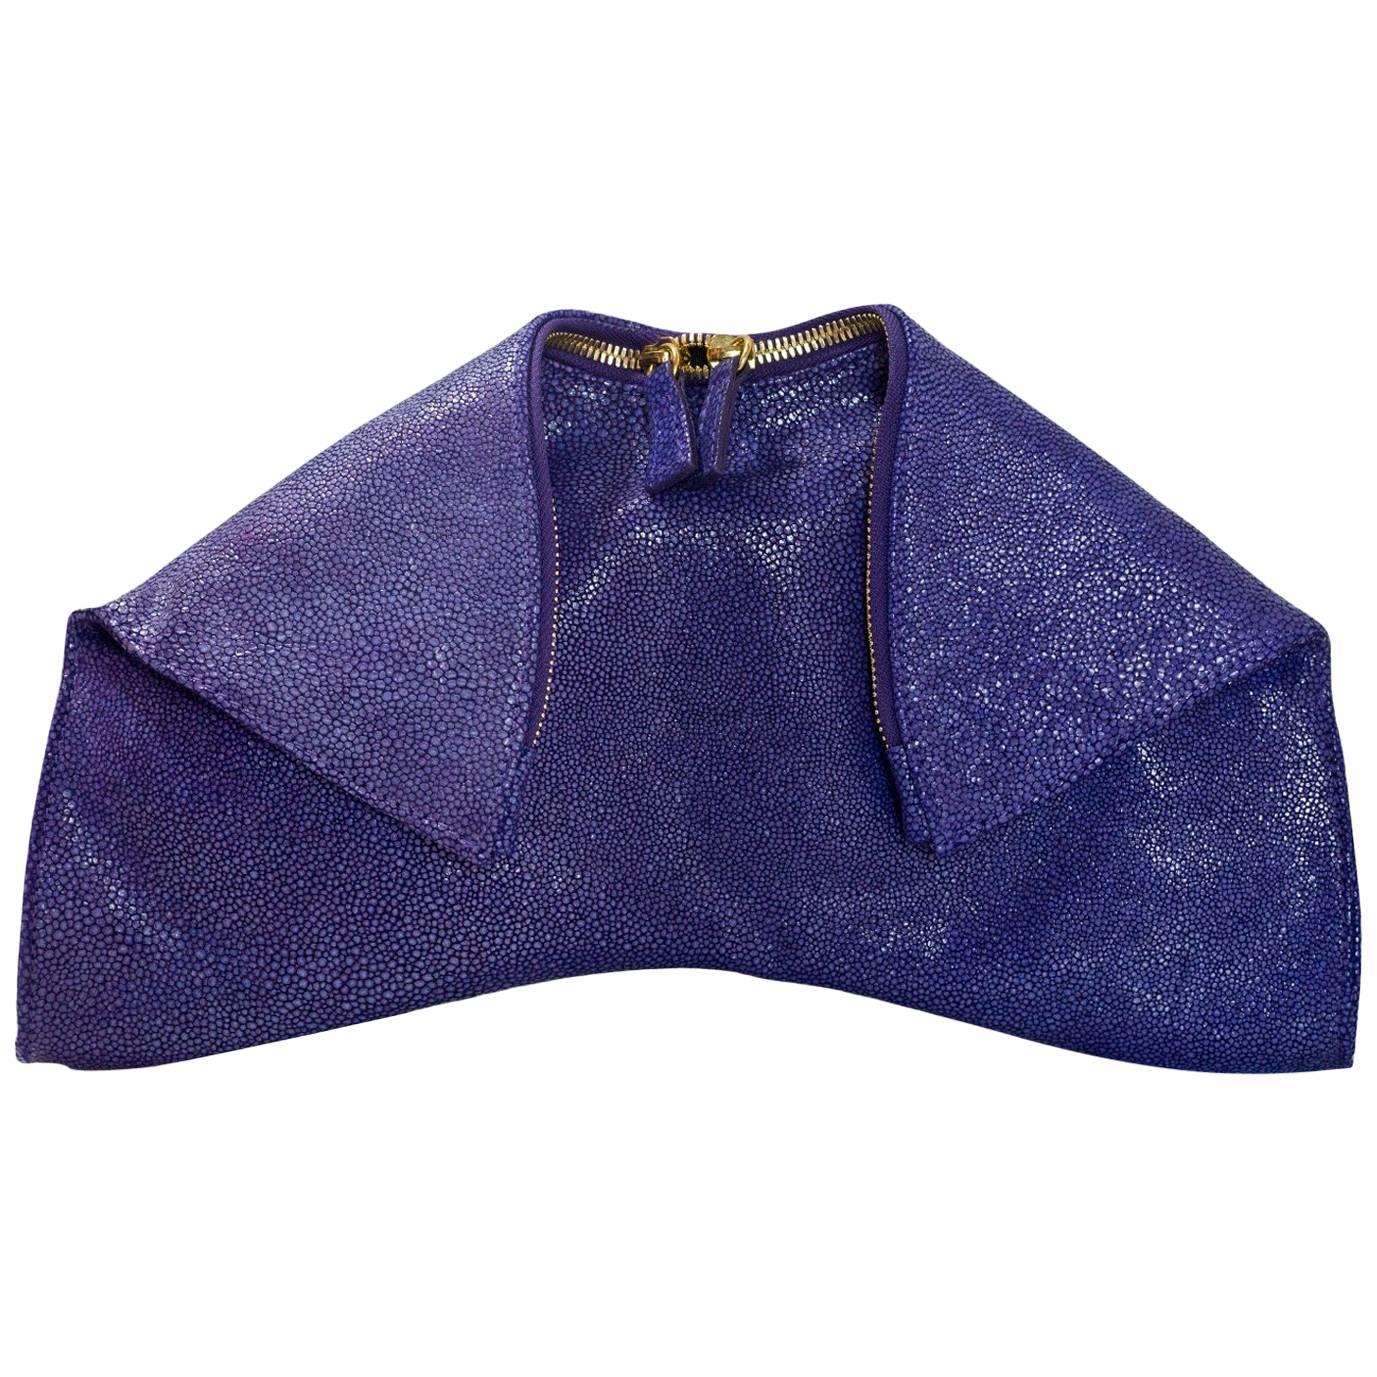 Emily Cho Purple Embossed Stingray Folded Clutch with Dust Bag rt. $595